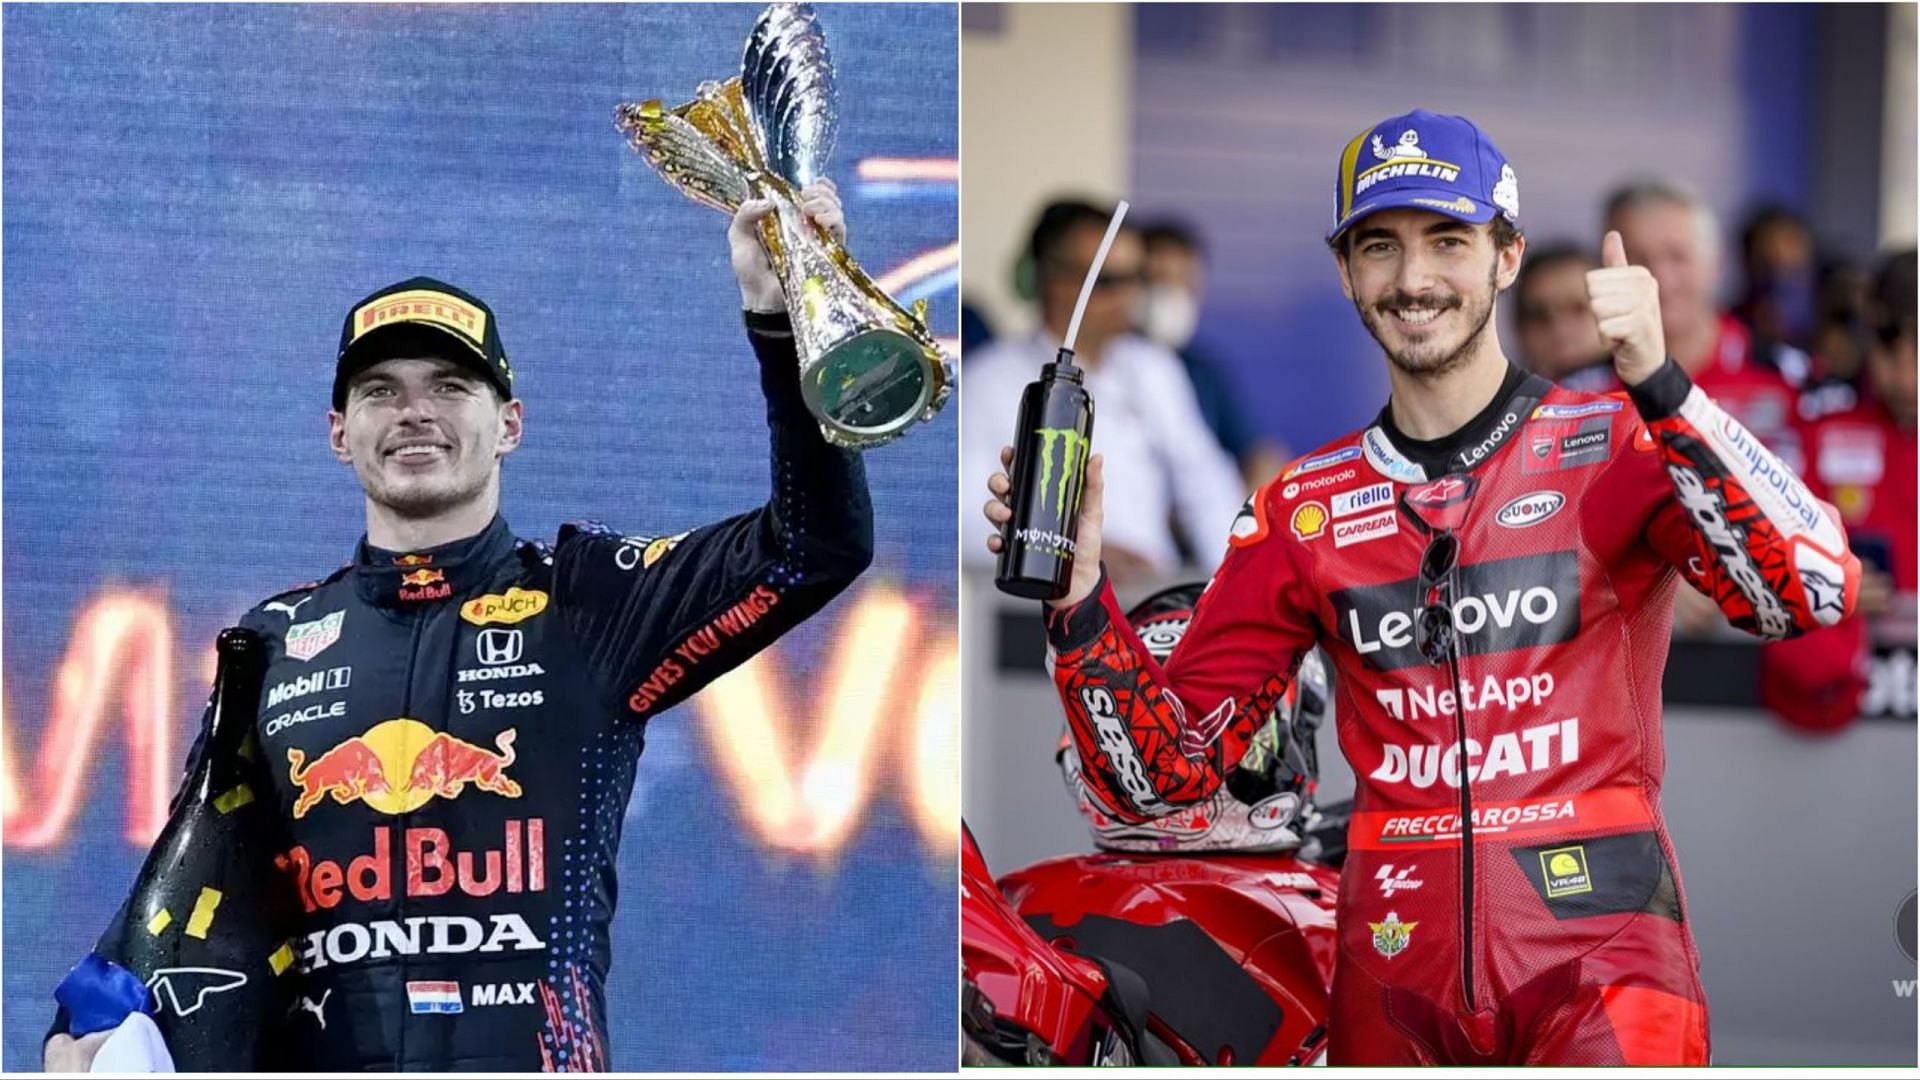 Parallels have been drawn between Pecco Bagnaia and Max Verstappen